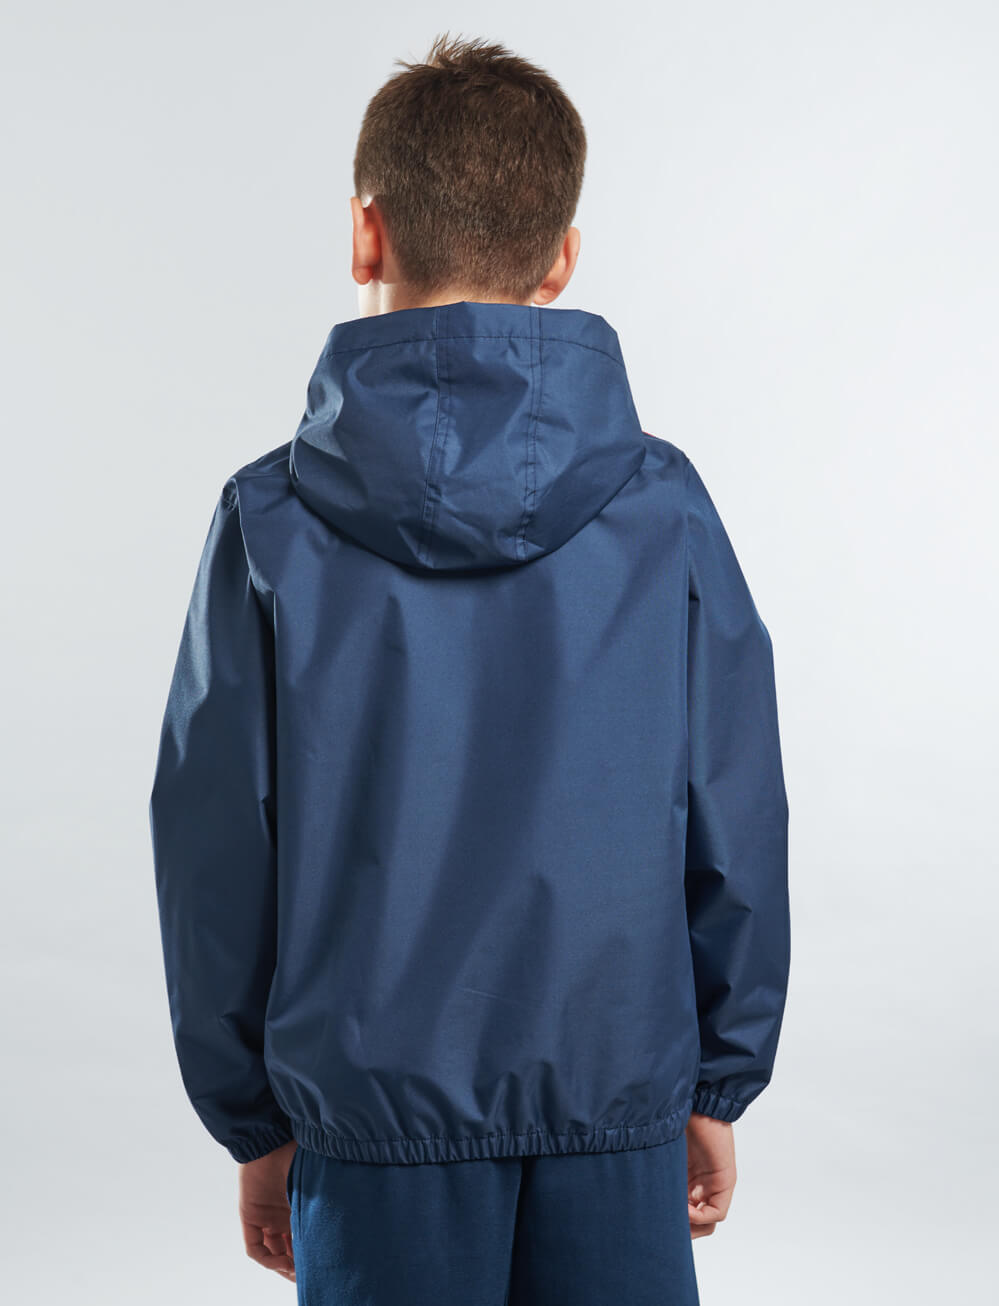 Official Arsenal Kids Shower Jacket - Navy - The World Football Store